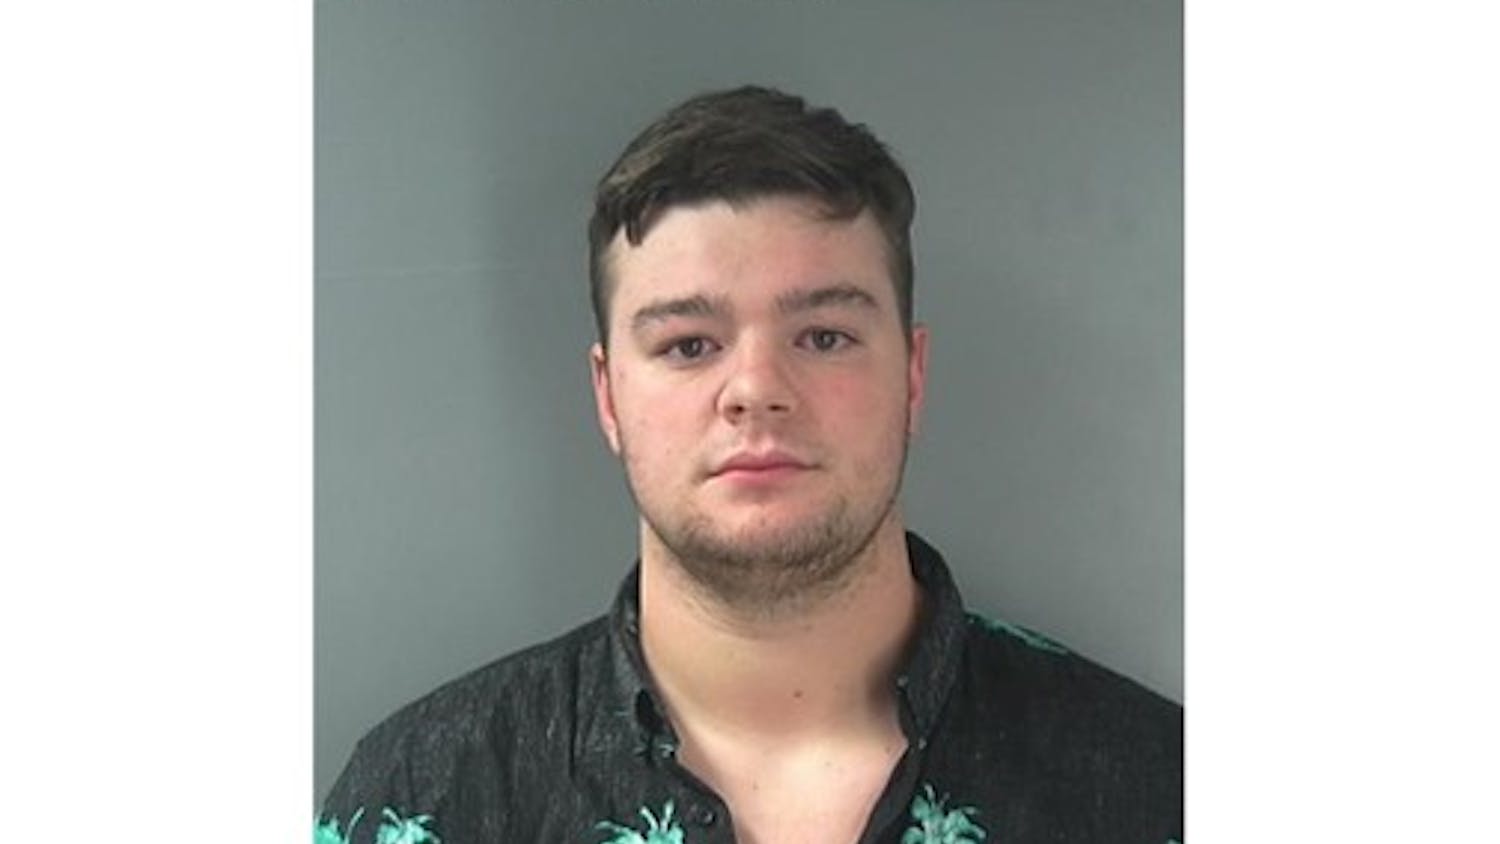 Sophomore baseball pitcher Cameron Beauchamp was arrested early Wednesday morning on charges of operating while intoxicated and minor possession/consumption of alcohol. He is being held in the Monroe County Correctional Center on a bond of $1,000.